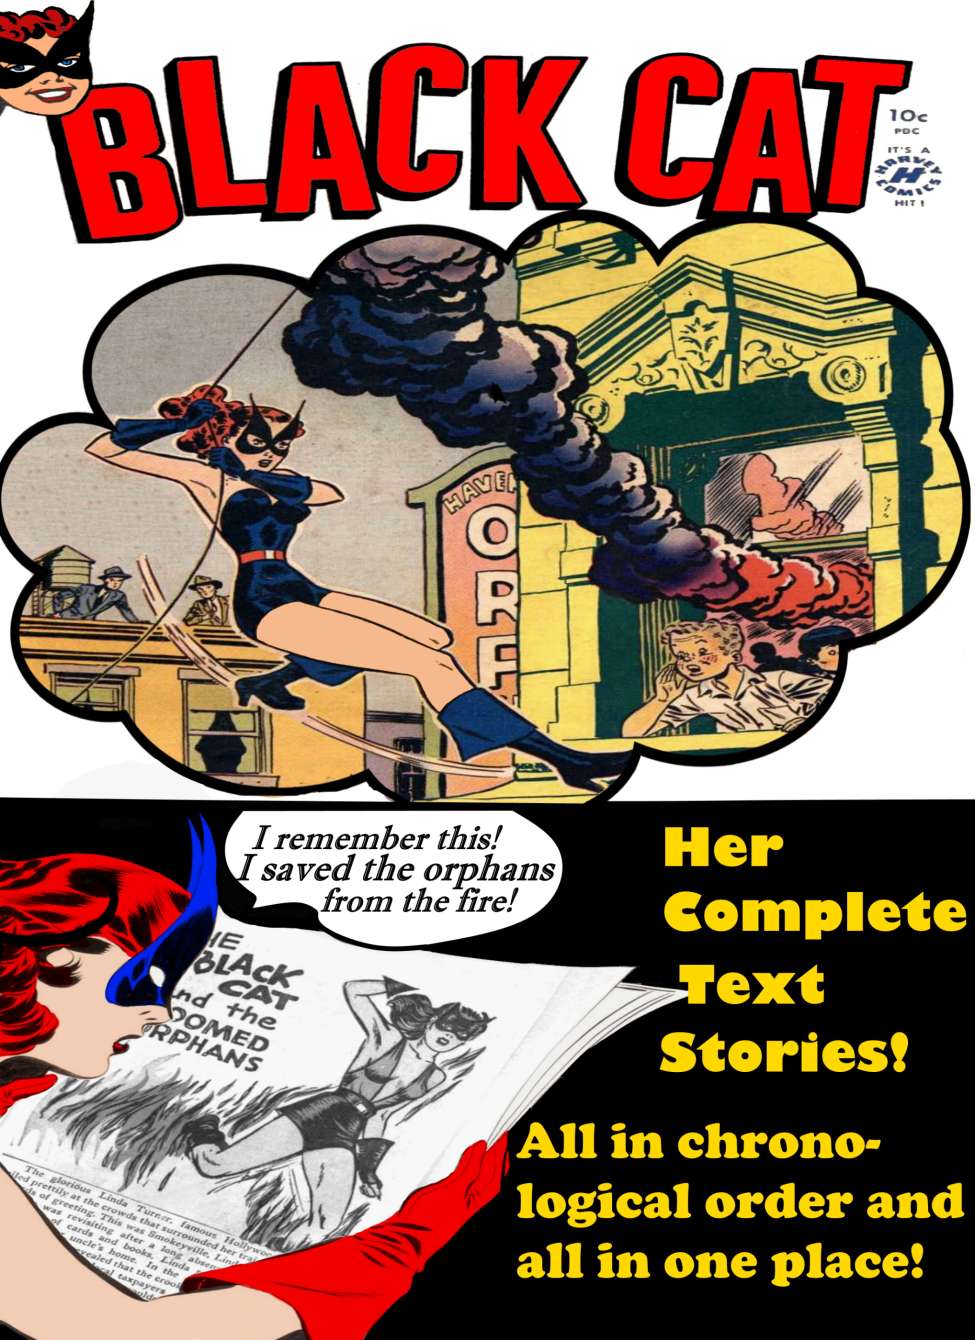 Comic Book Cover For Black Cat Collected Text Stories